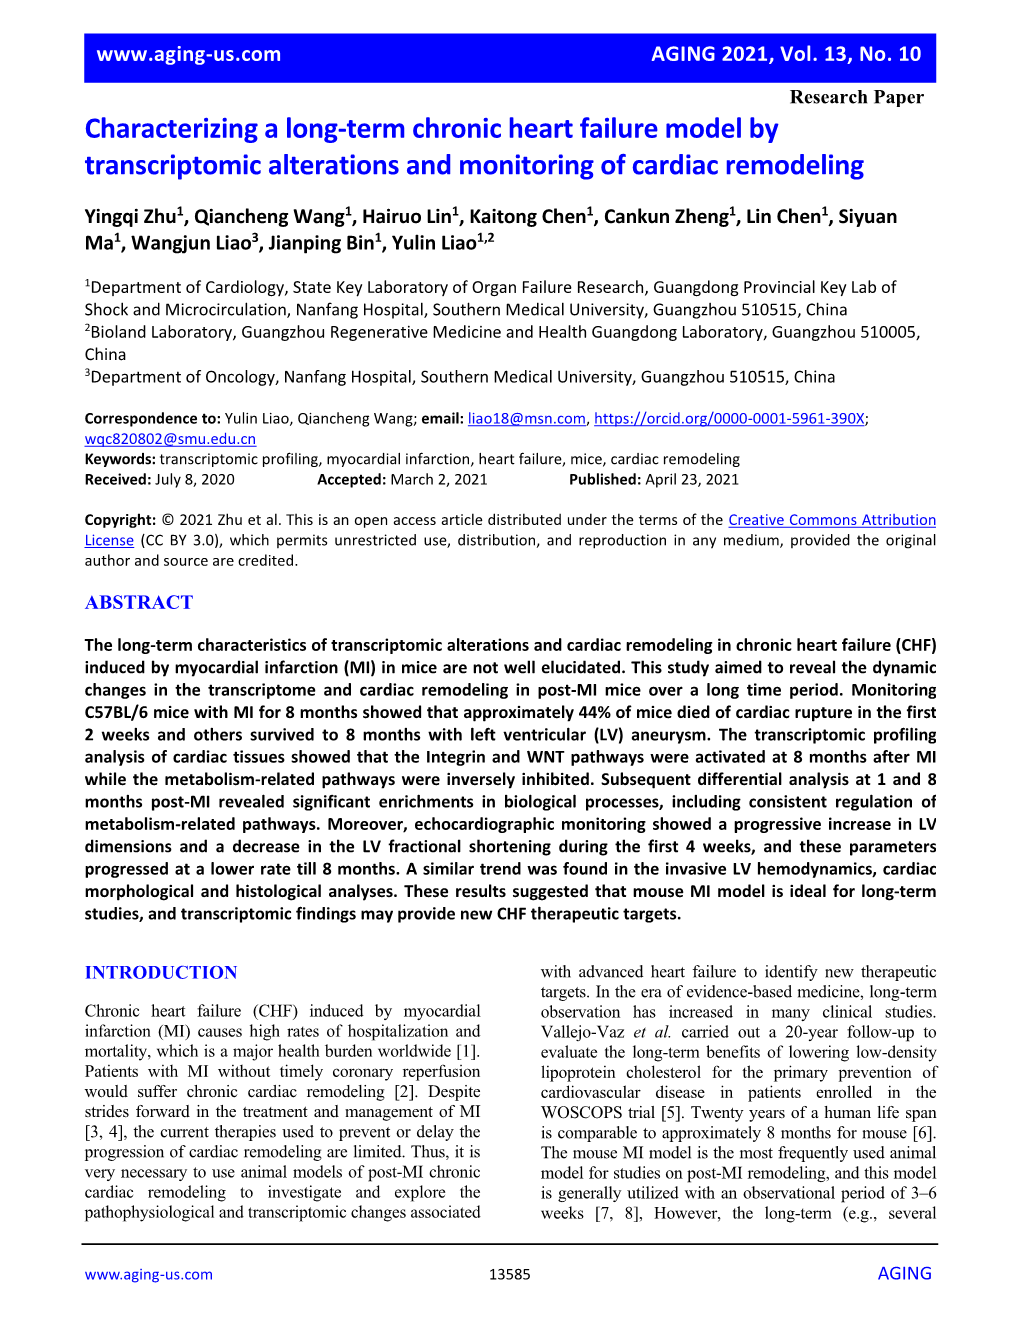 Characterizing a Long-Term Chronic Heart Failure Model by Transcriptomic Alterations and Monitoring of Cardiac Remodeling